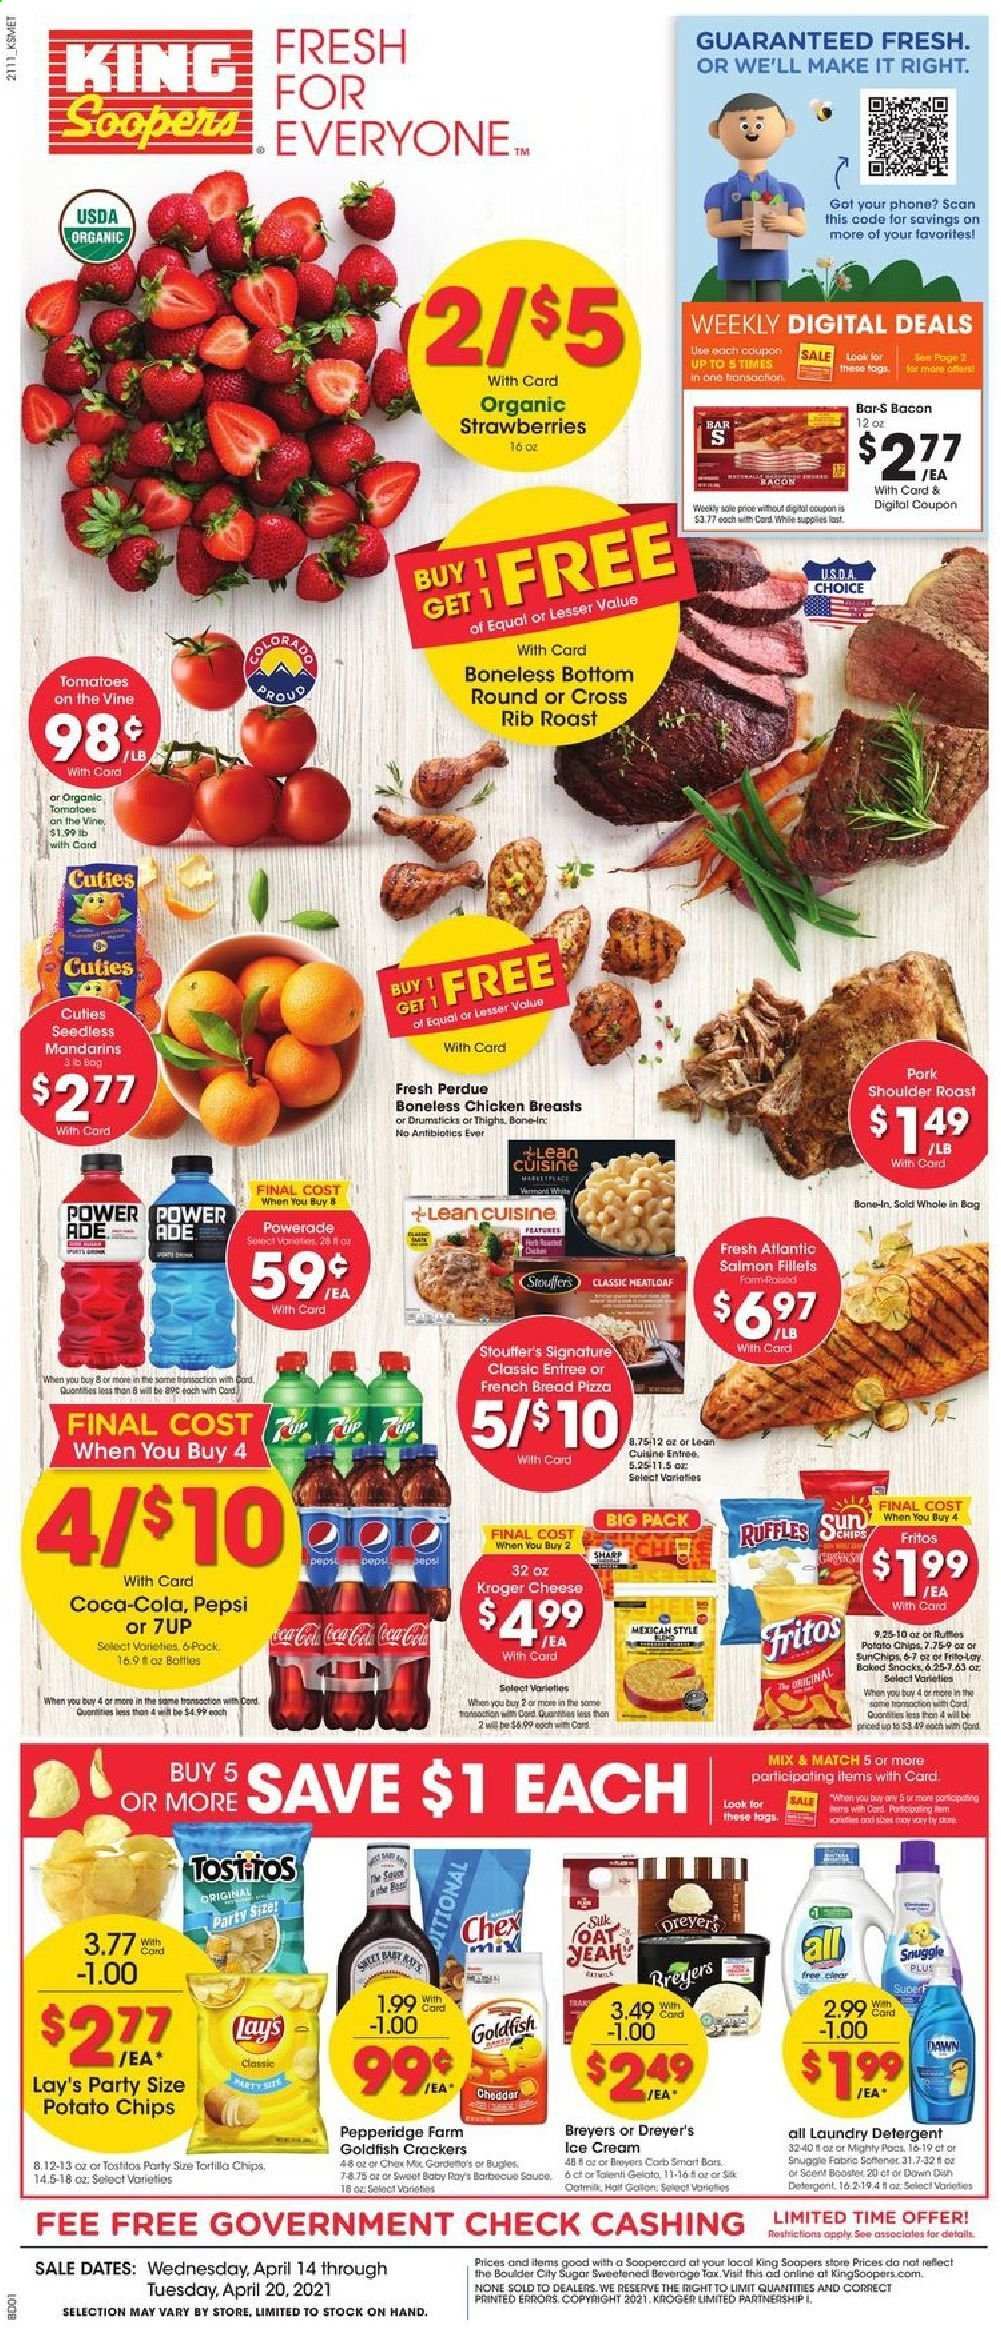 thumbnail - King Soopers Flyer - 04/14/2021 - 04/20/2021 - Sales products - bread, tomatoes, mandarines, strawberries, salmon, salmon fillet, pizza, Lean Cuisine, Perdue®, bacon, ice cream, gelato, snack, crackers, Fritos, potato chips, chips, Lay’s, Goldfish, Ruffles, Tostitos, sugar, oats, Coca-Cola, Powerade, Pepsi, 7UP, chicken breasts, detergent, Snuggle, laundry detergent, Sharp. Page 1.